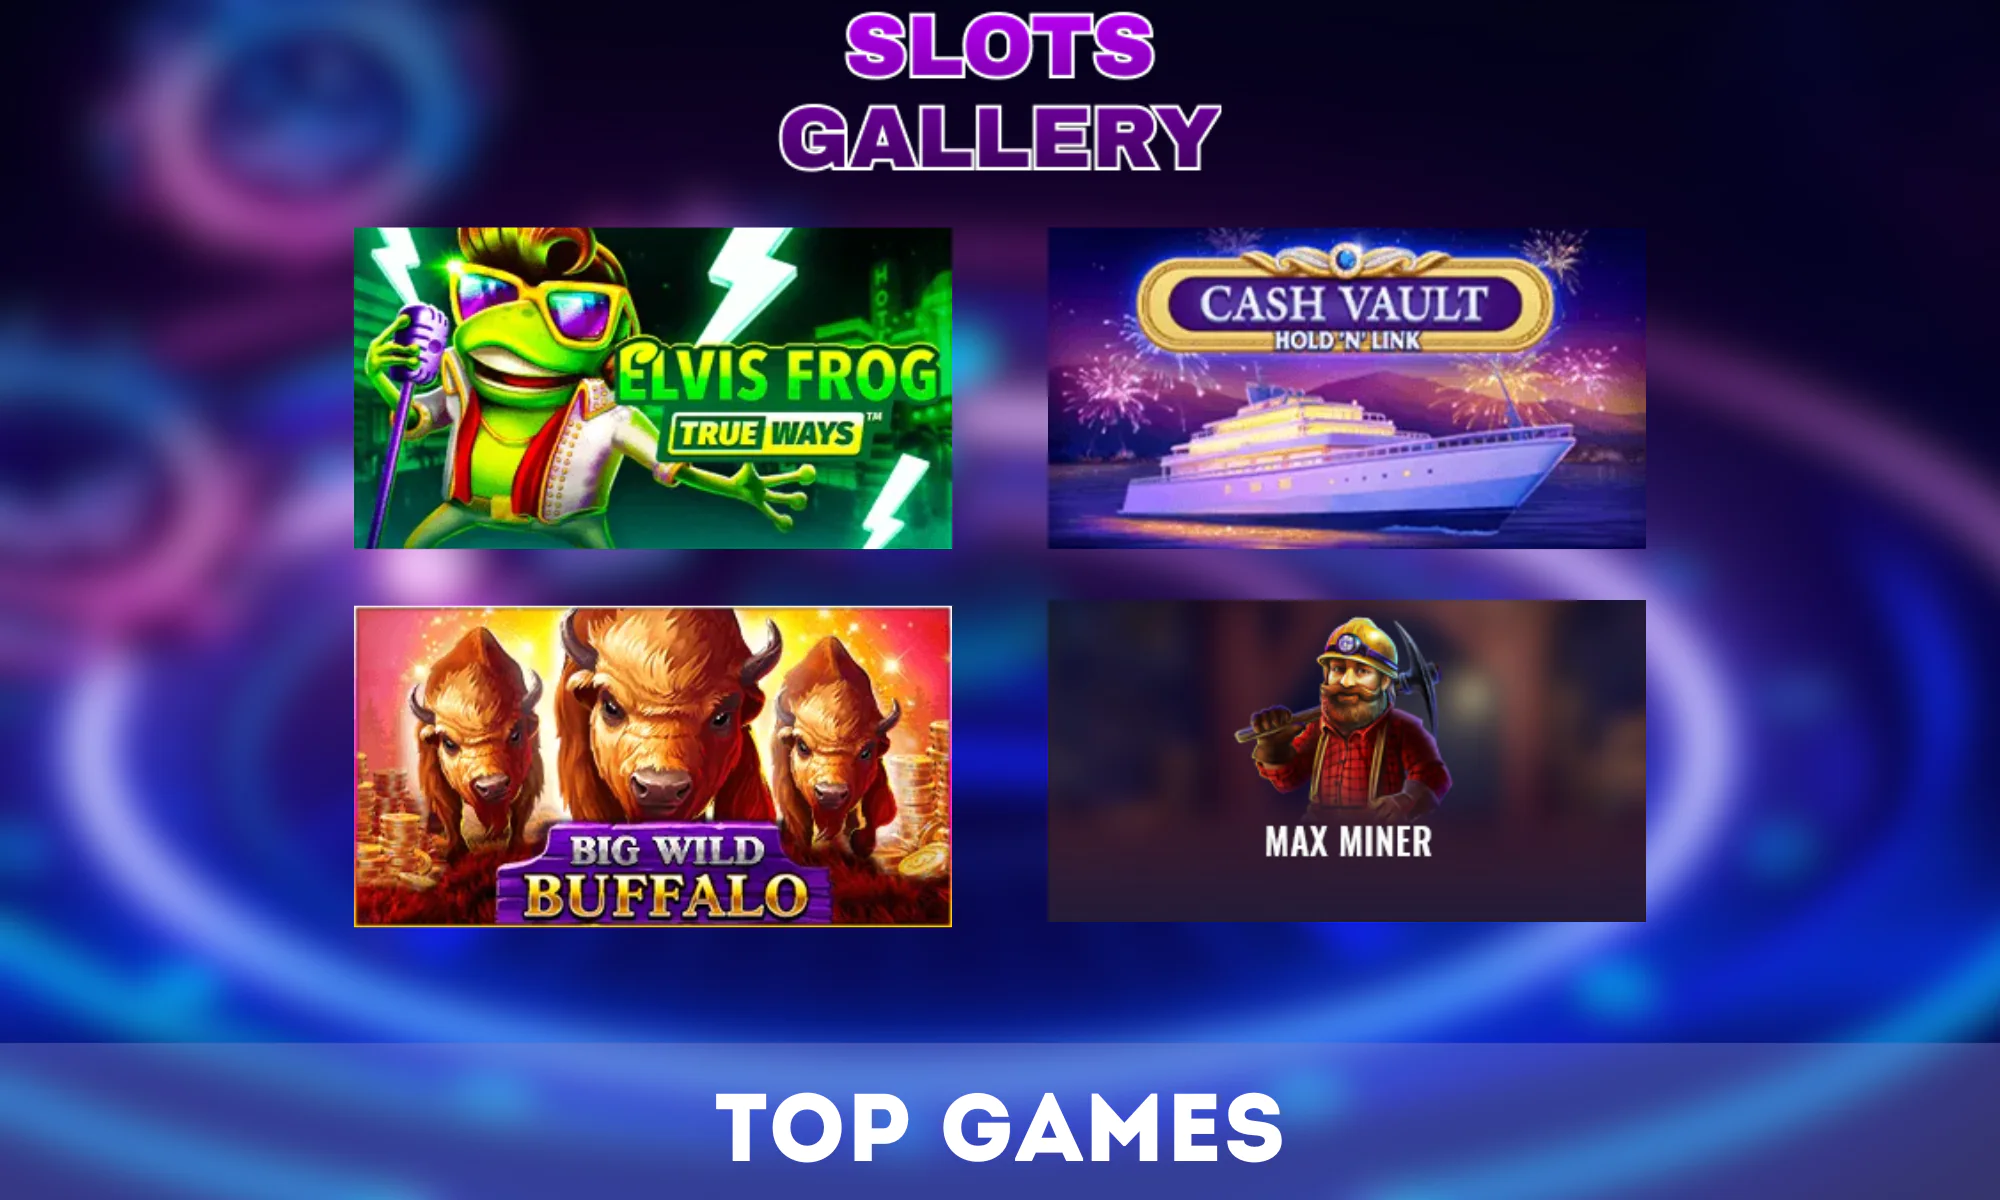 The "Best Games" category in the Slots gallery makes it easier for newcomers to find high-level games